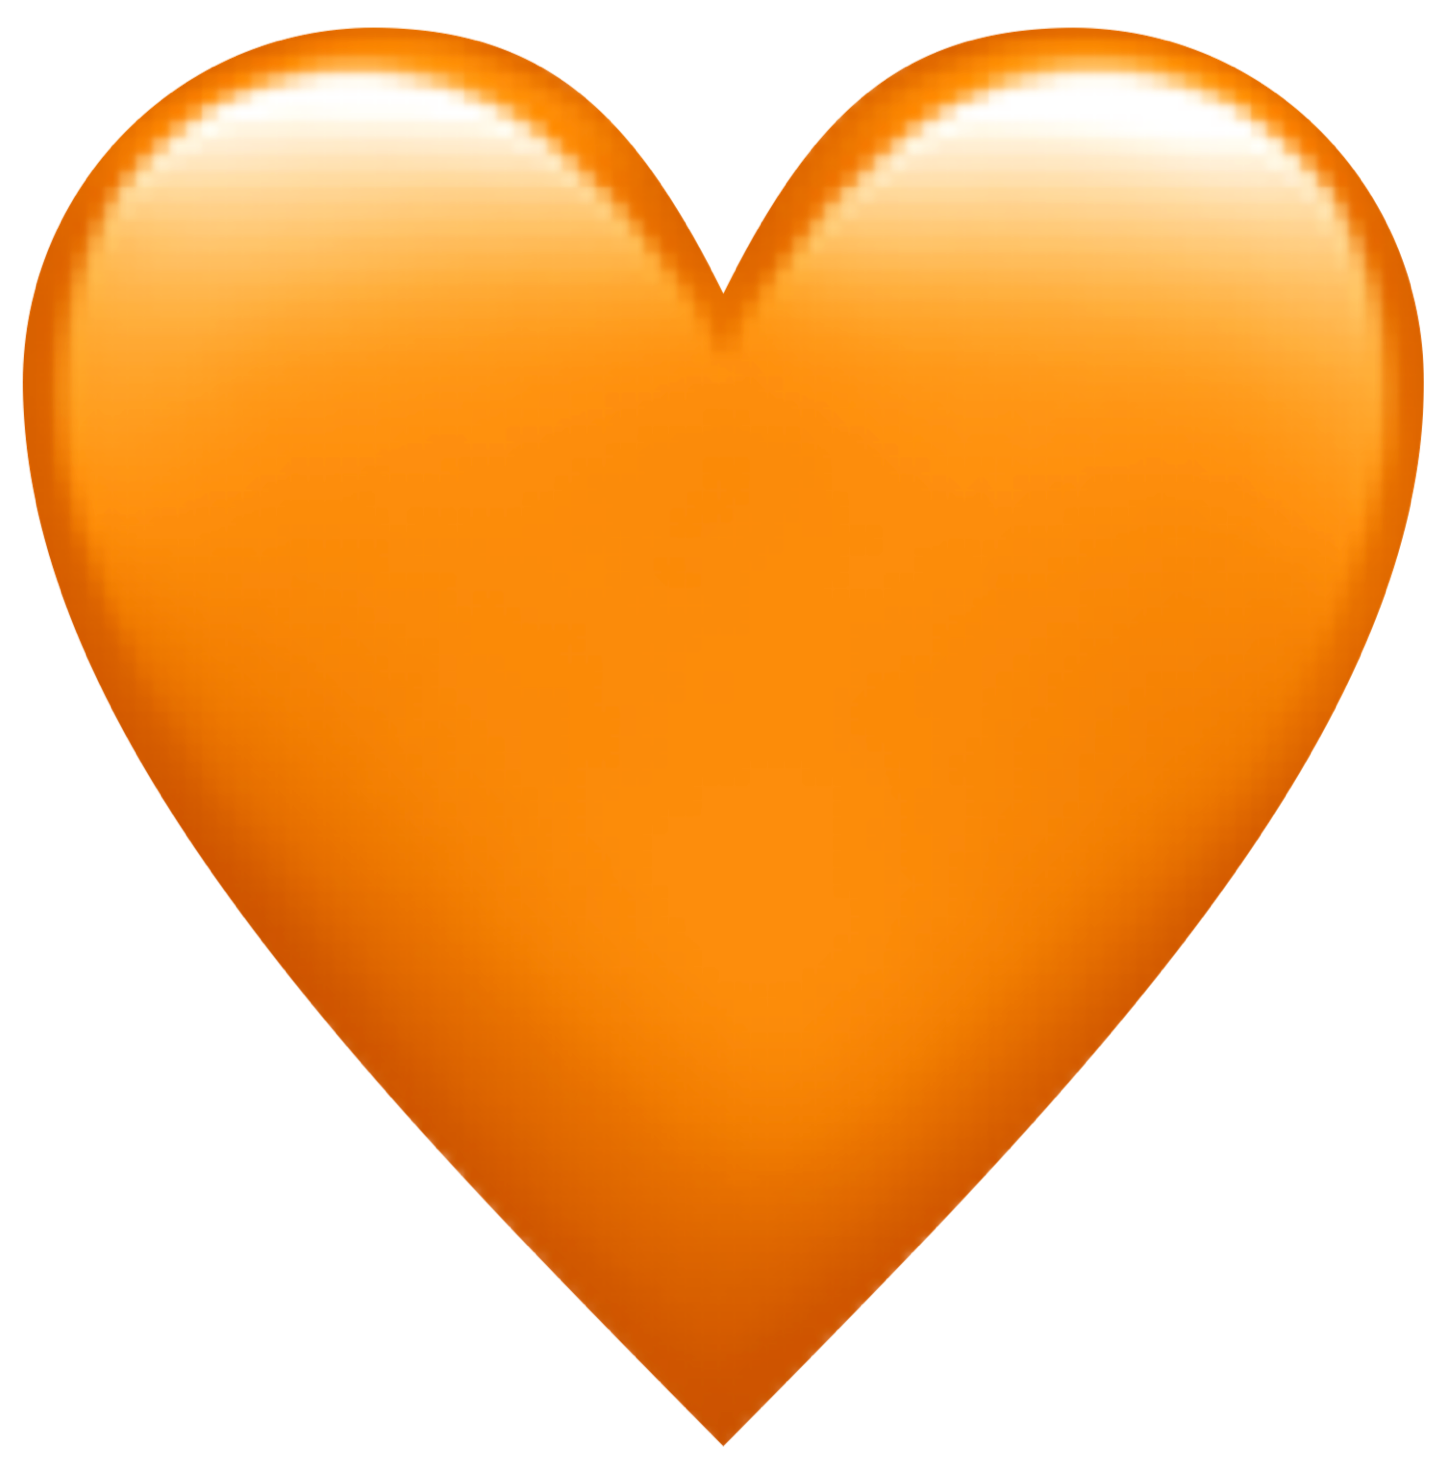 Heart Emoji PNG Picture - PNG All